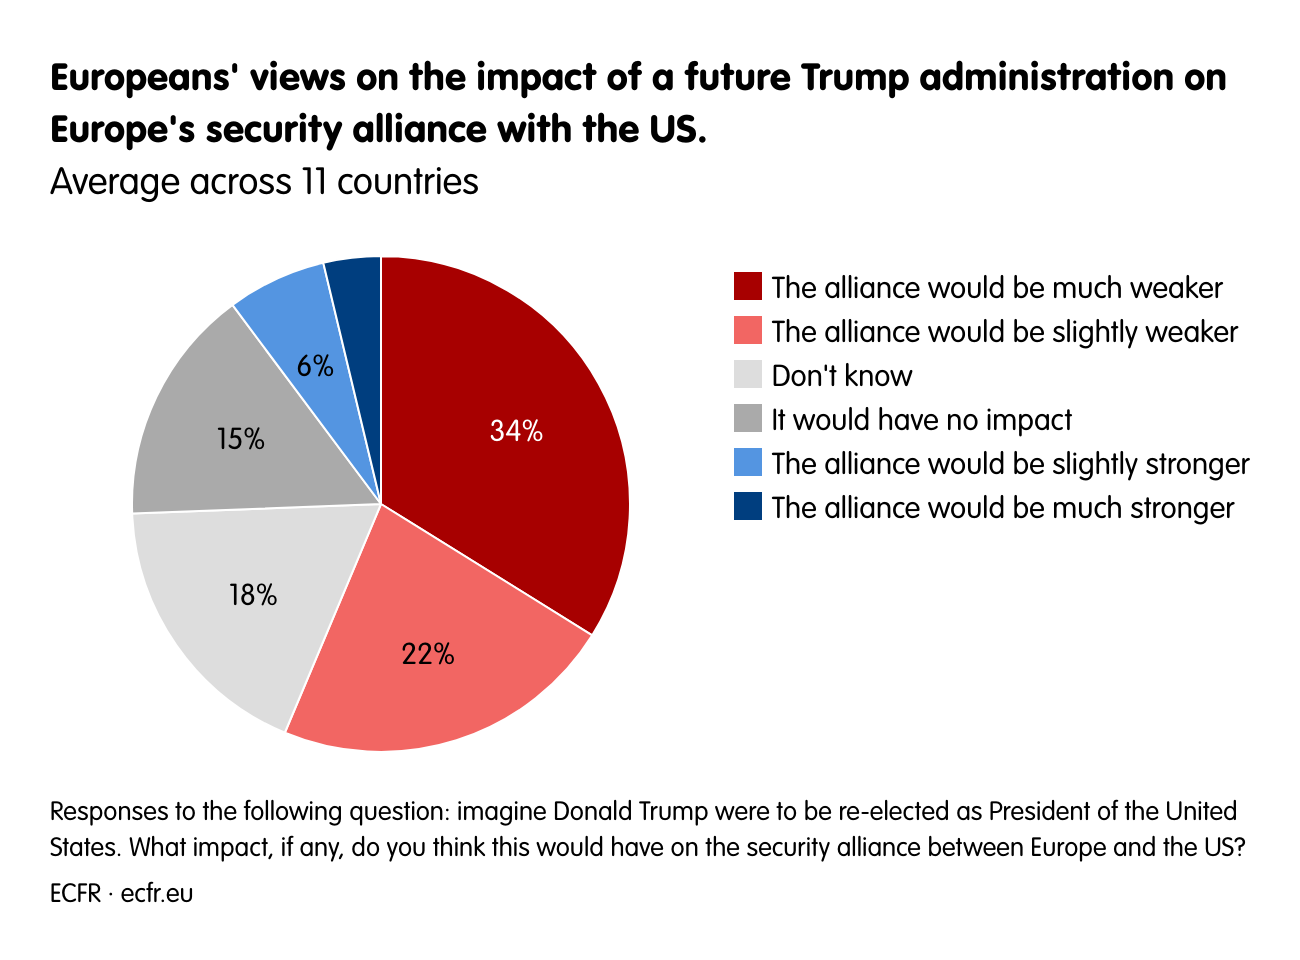 Europeans' views on the impact of a future Trump administration on Europe's security alliance with the US.